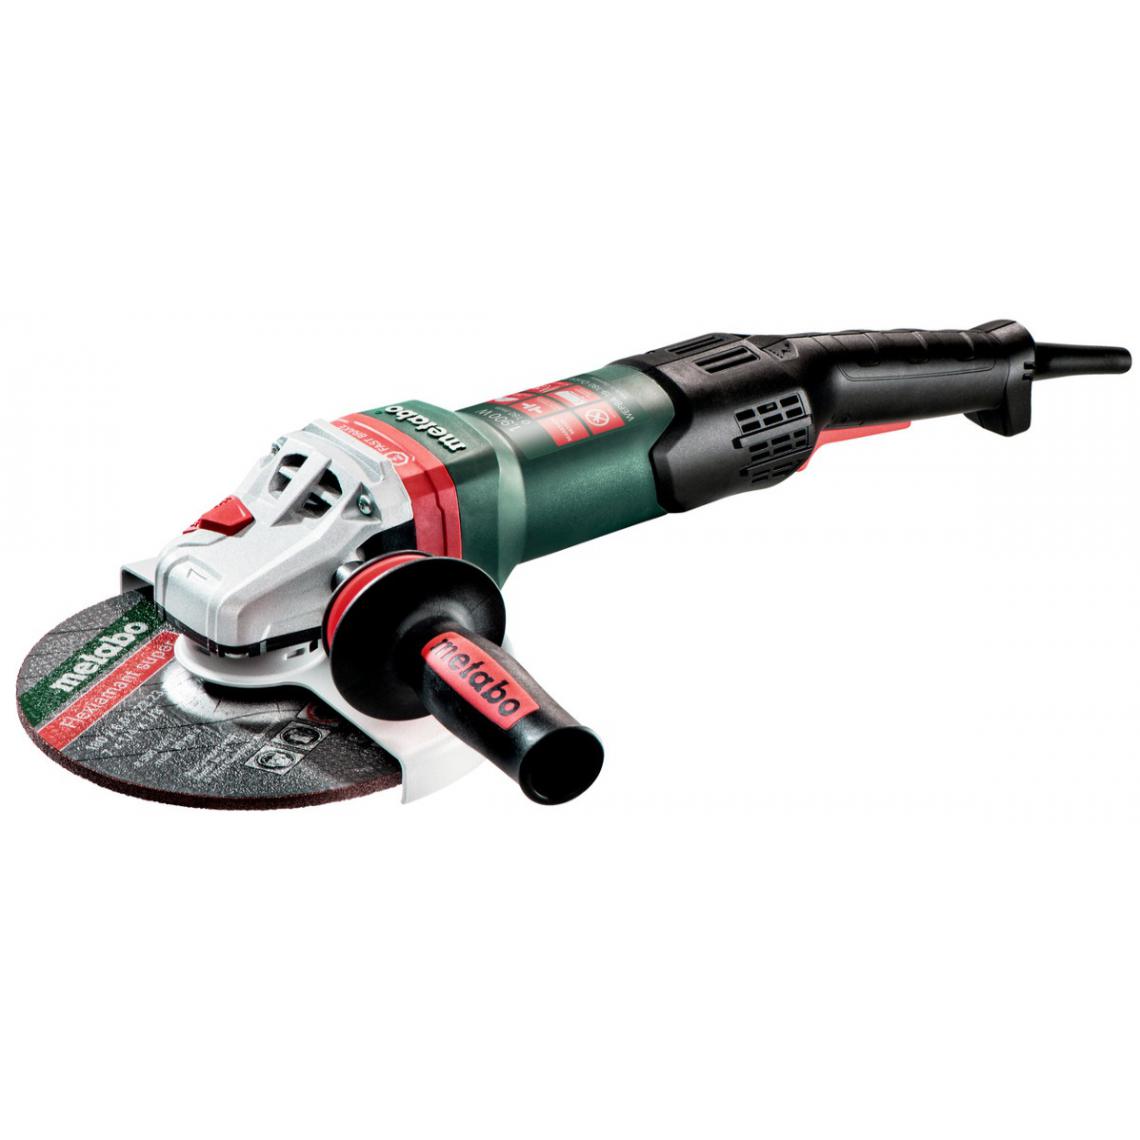 Metabo - Metabo - Meuleuse d'angle 180mm 1900W - WEPBA 19-180 Quick RT - Meuleuses